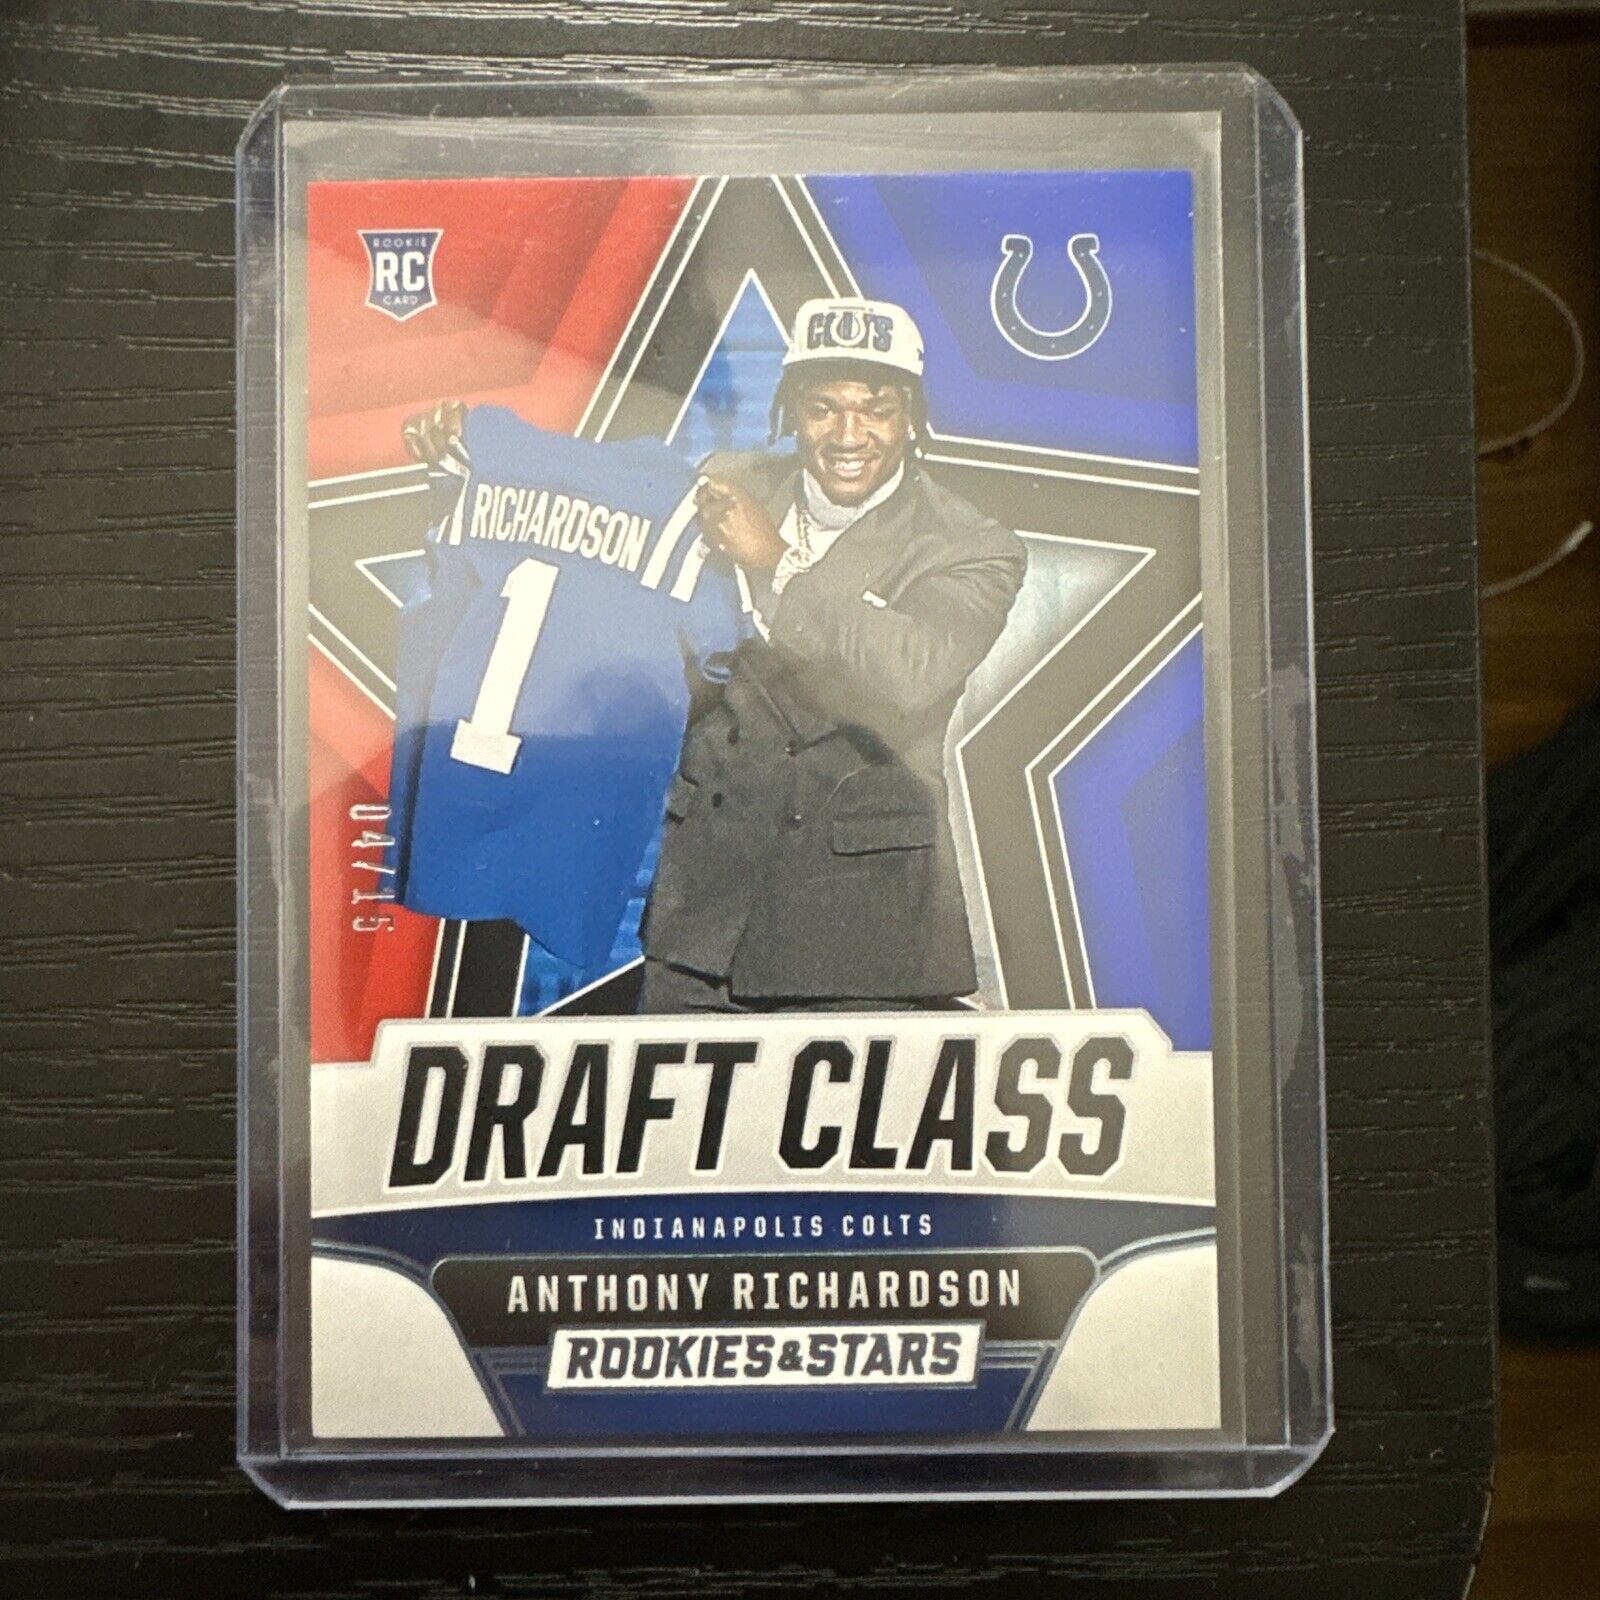 2023 Rookies And Stars Anthony Richardson Draft Class, 4/15 Red & Blue RC 🔥AR15